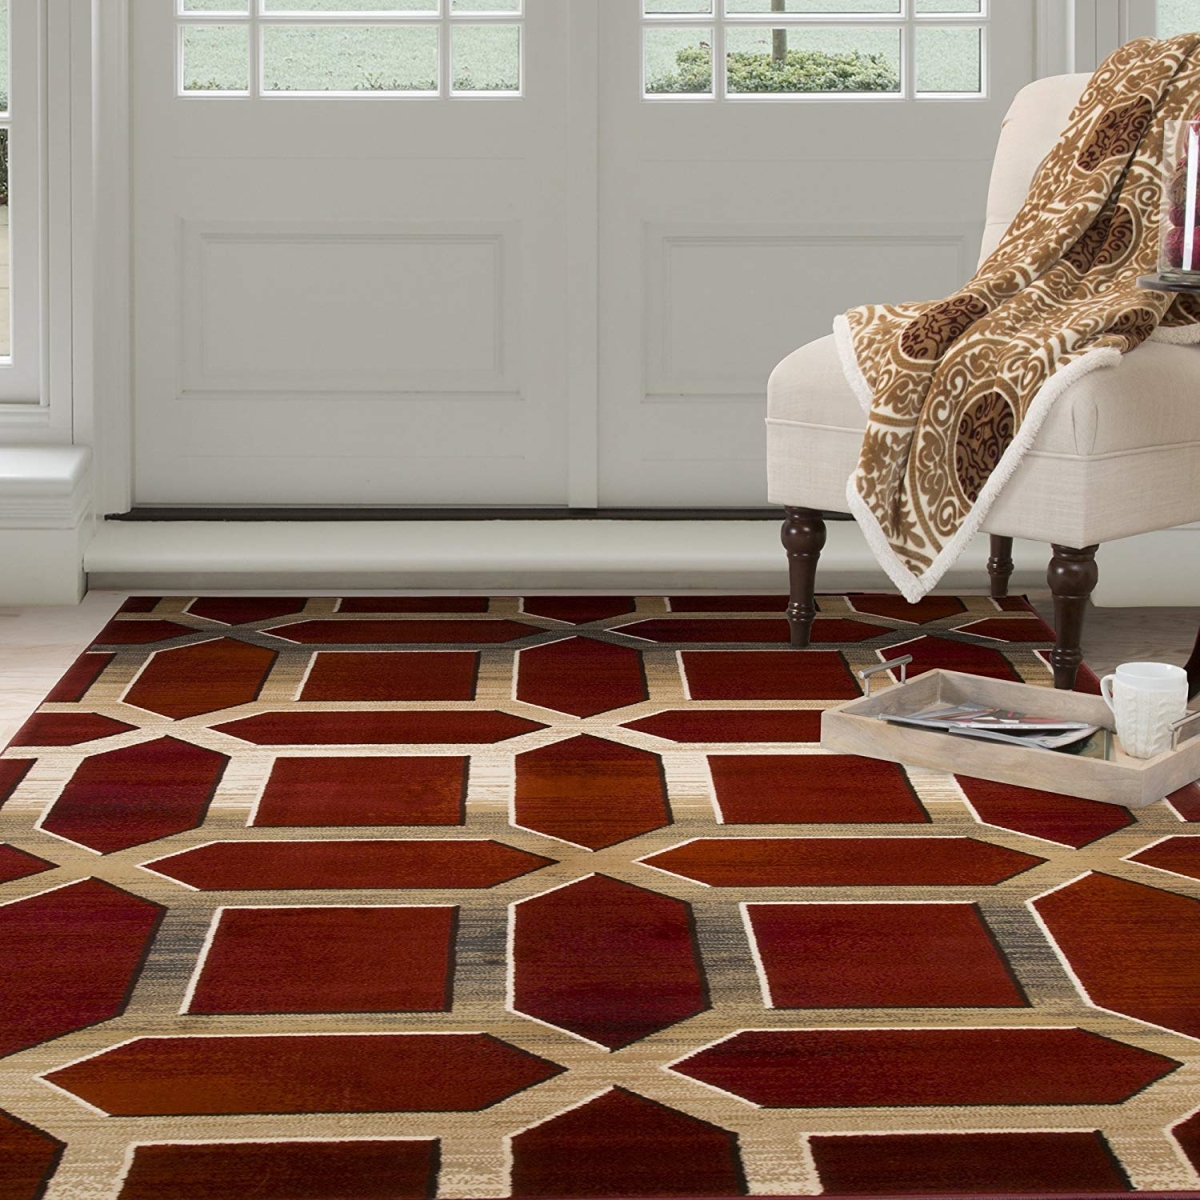 62a-26707 Opus Art Deco Area Rug, 3 Ft. 3 In. X 5 Ft. - Burgundy